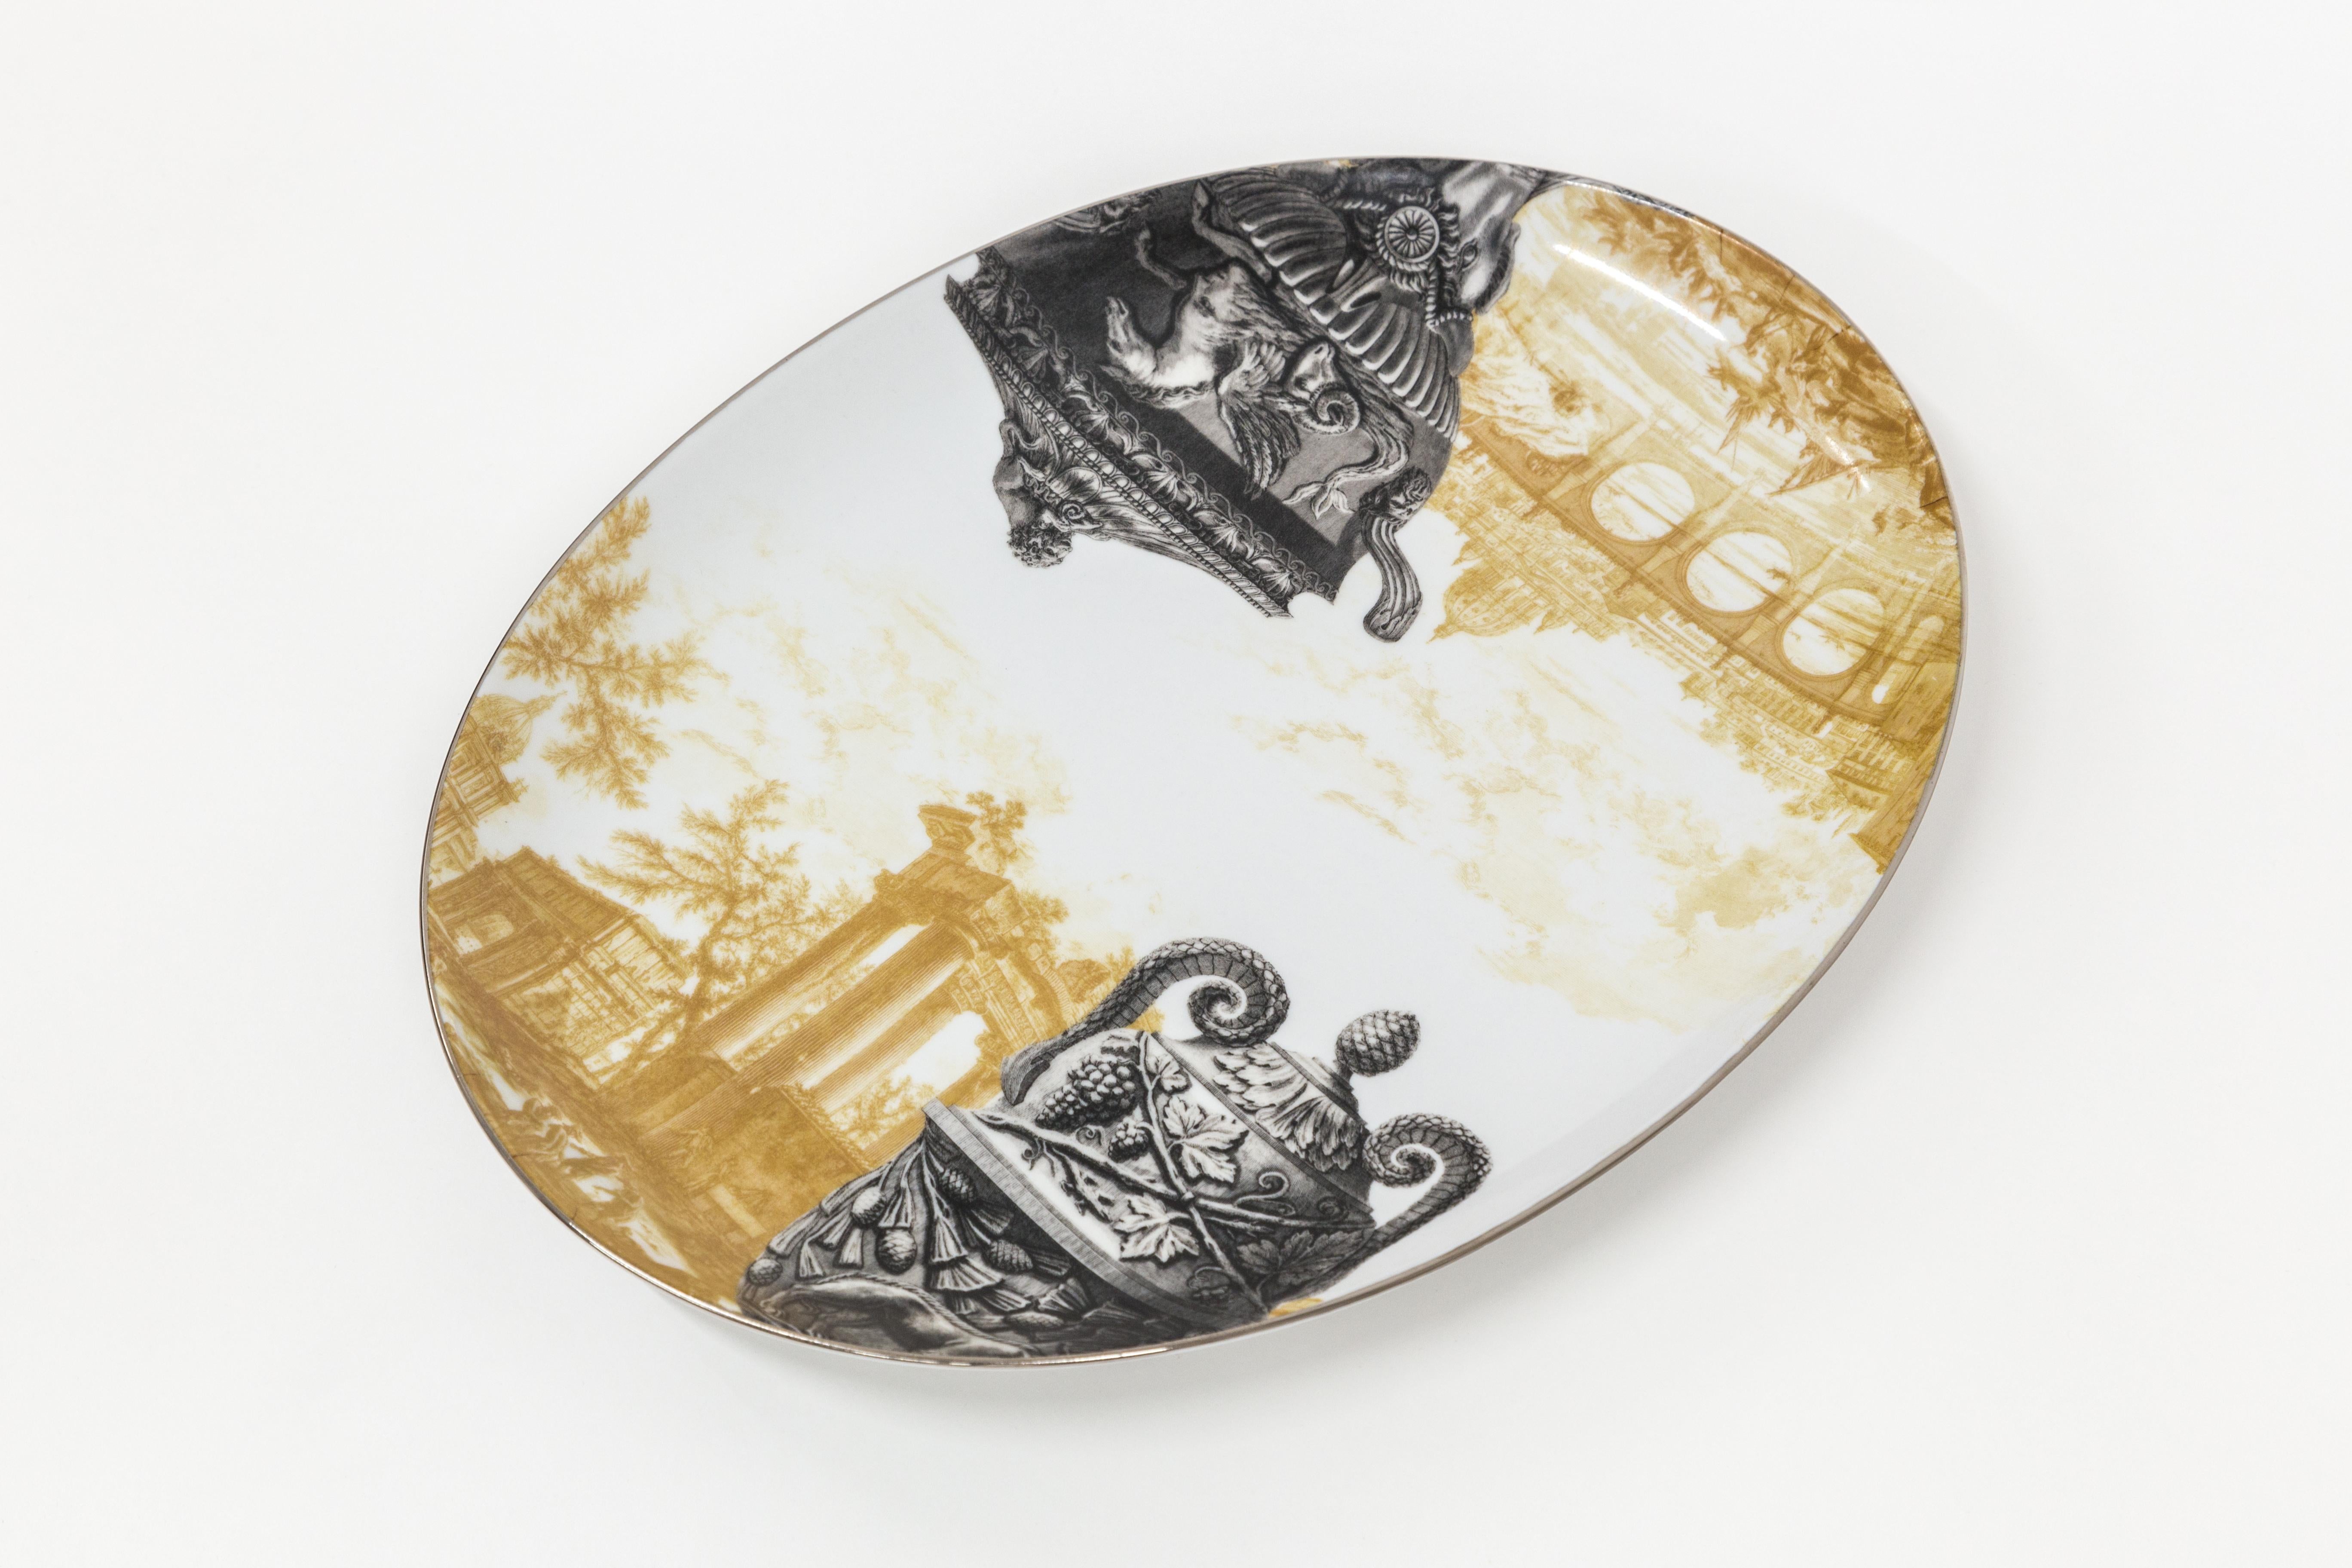 This 28x38cm oval tray is part of Pompei collection by Grand Tour by Vito Nesta. The classic and versatile shape is a must-have inside any home to embellish a table or beautify a wall. This tray is embellished with an ancient grotesque design. The